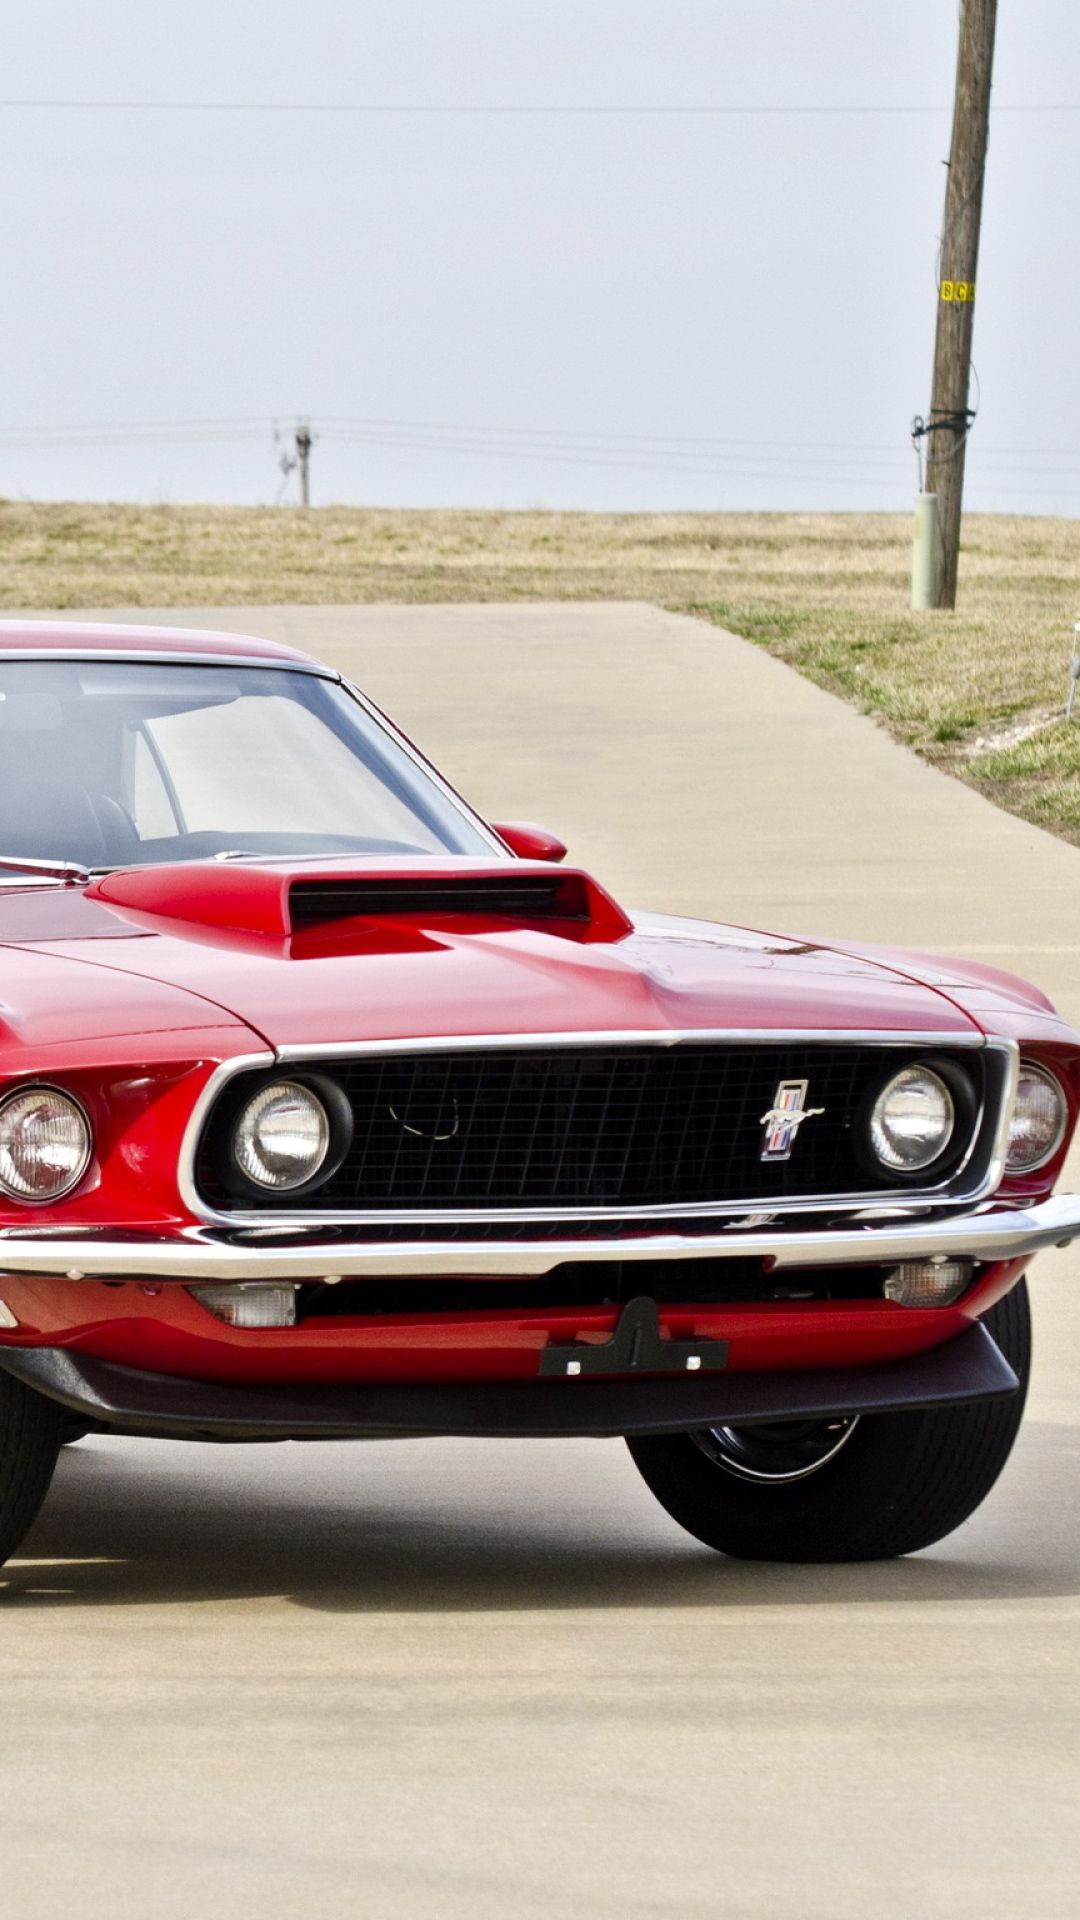 Download Wallpaper 1080x1920 Boss, Muscle car, Ford, 1969, Red ...